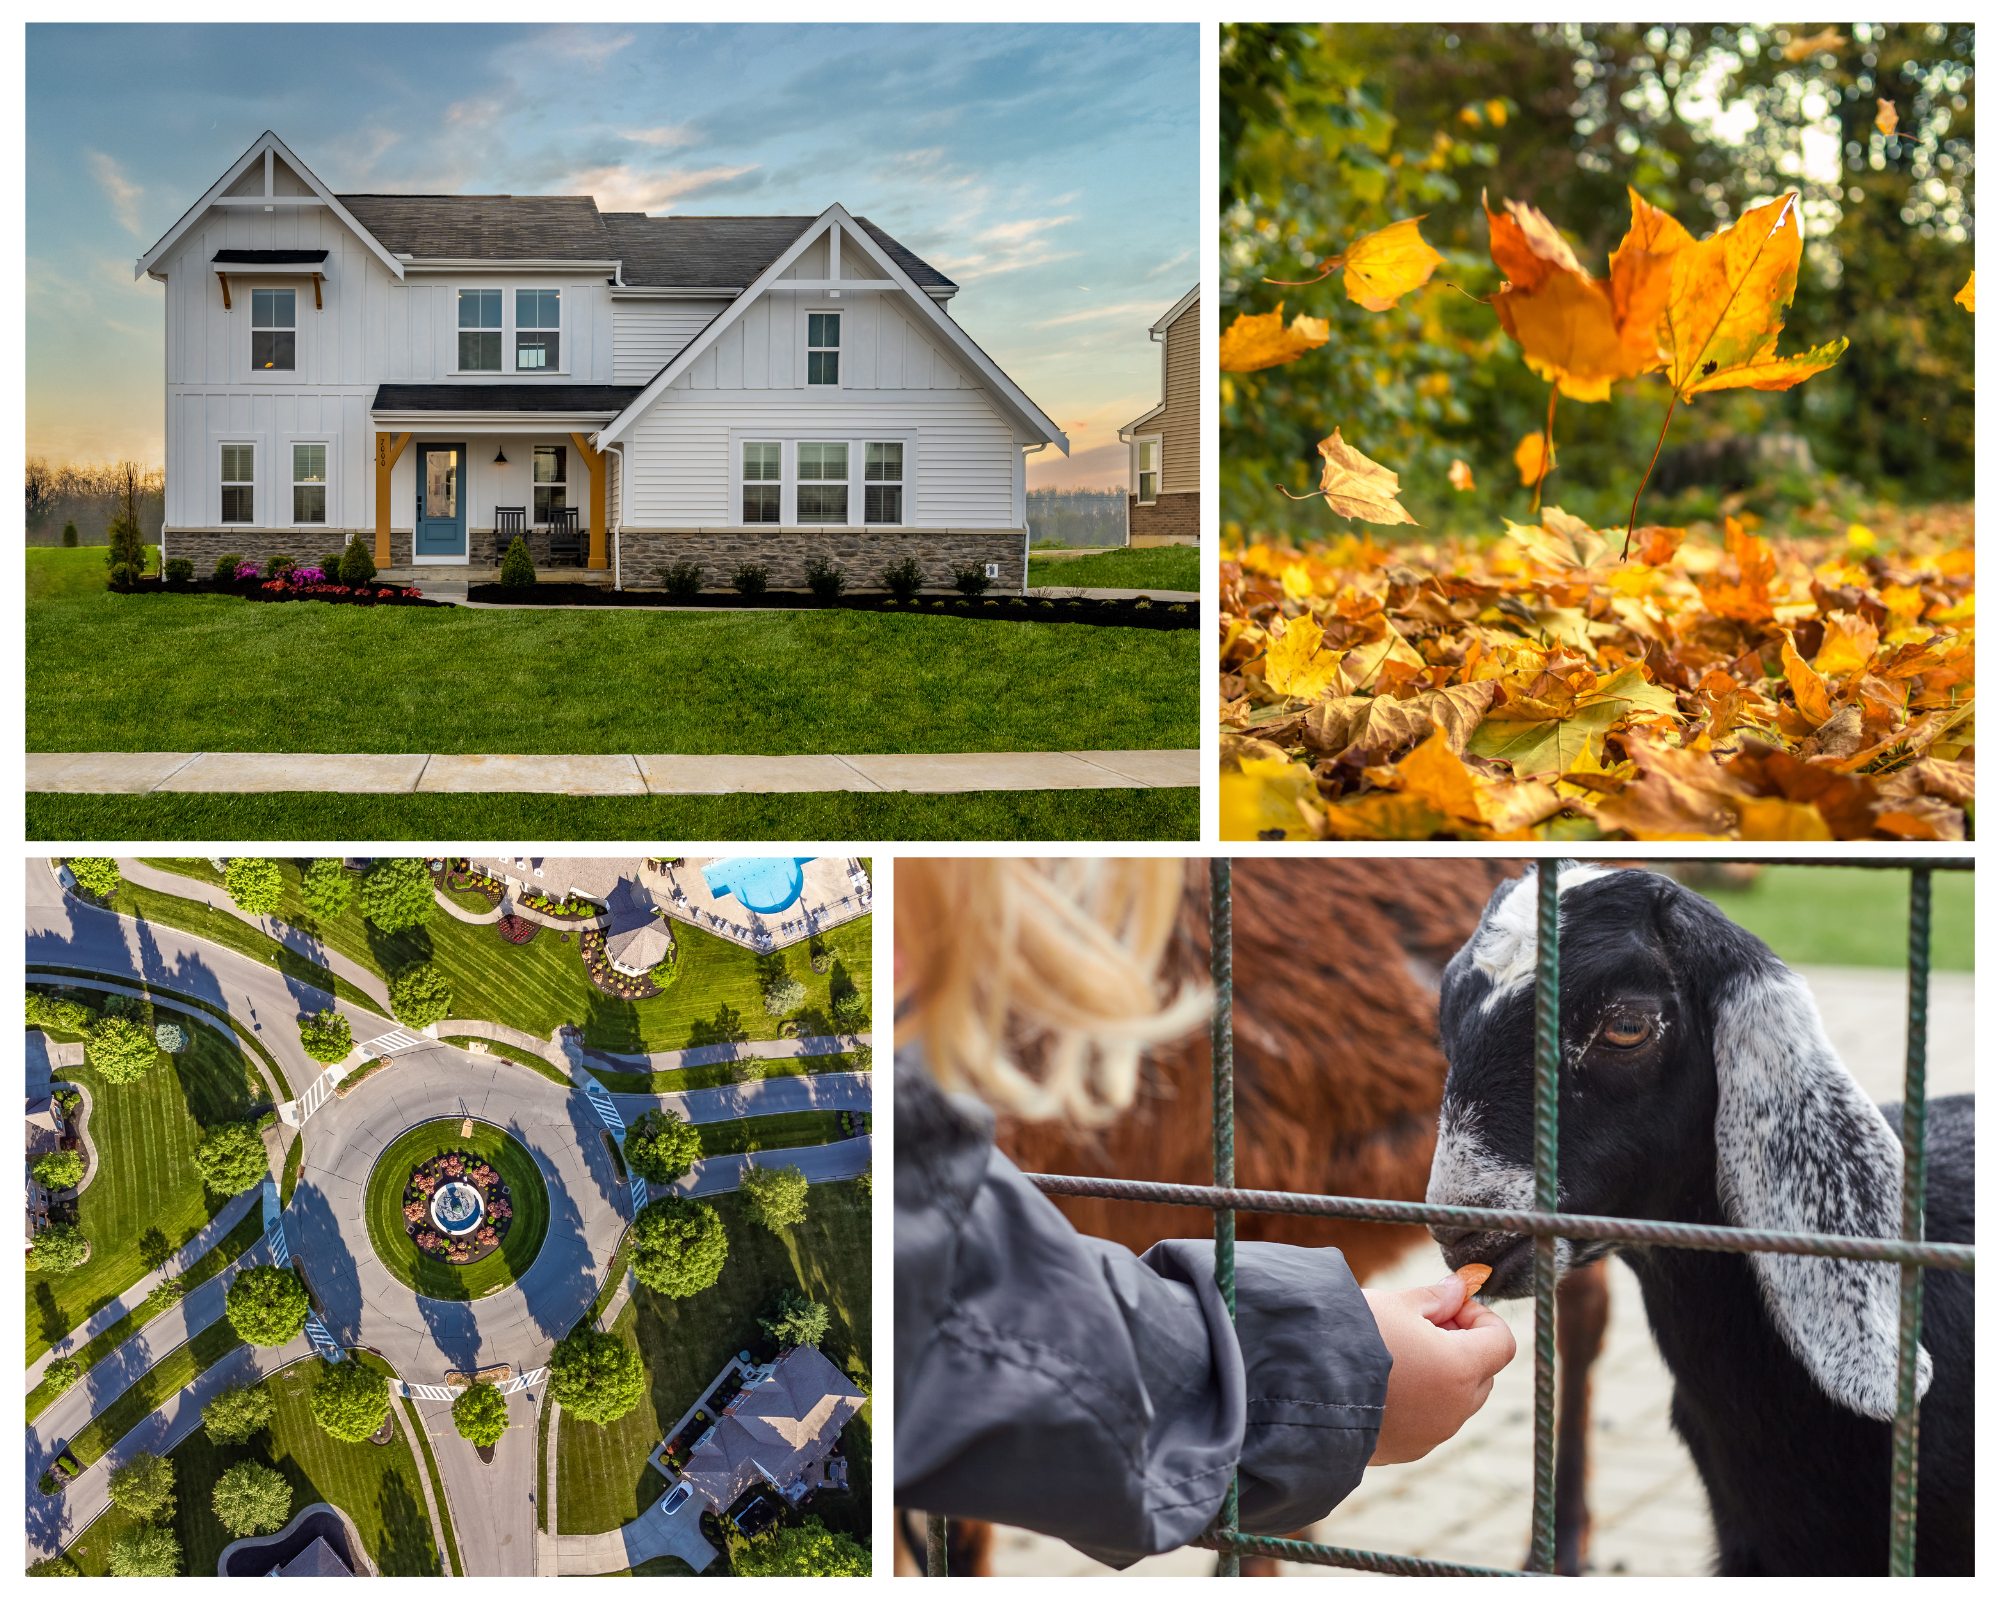 Join us on Sunday, September 18 from 2 to 4pm for our Fischer Homes Fall Festival in Independence, KY!